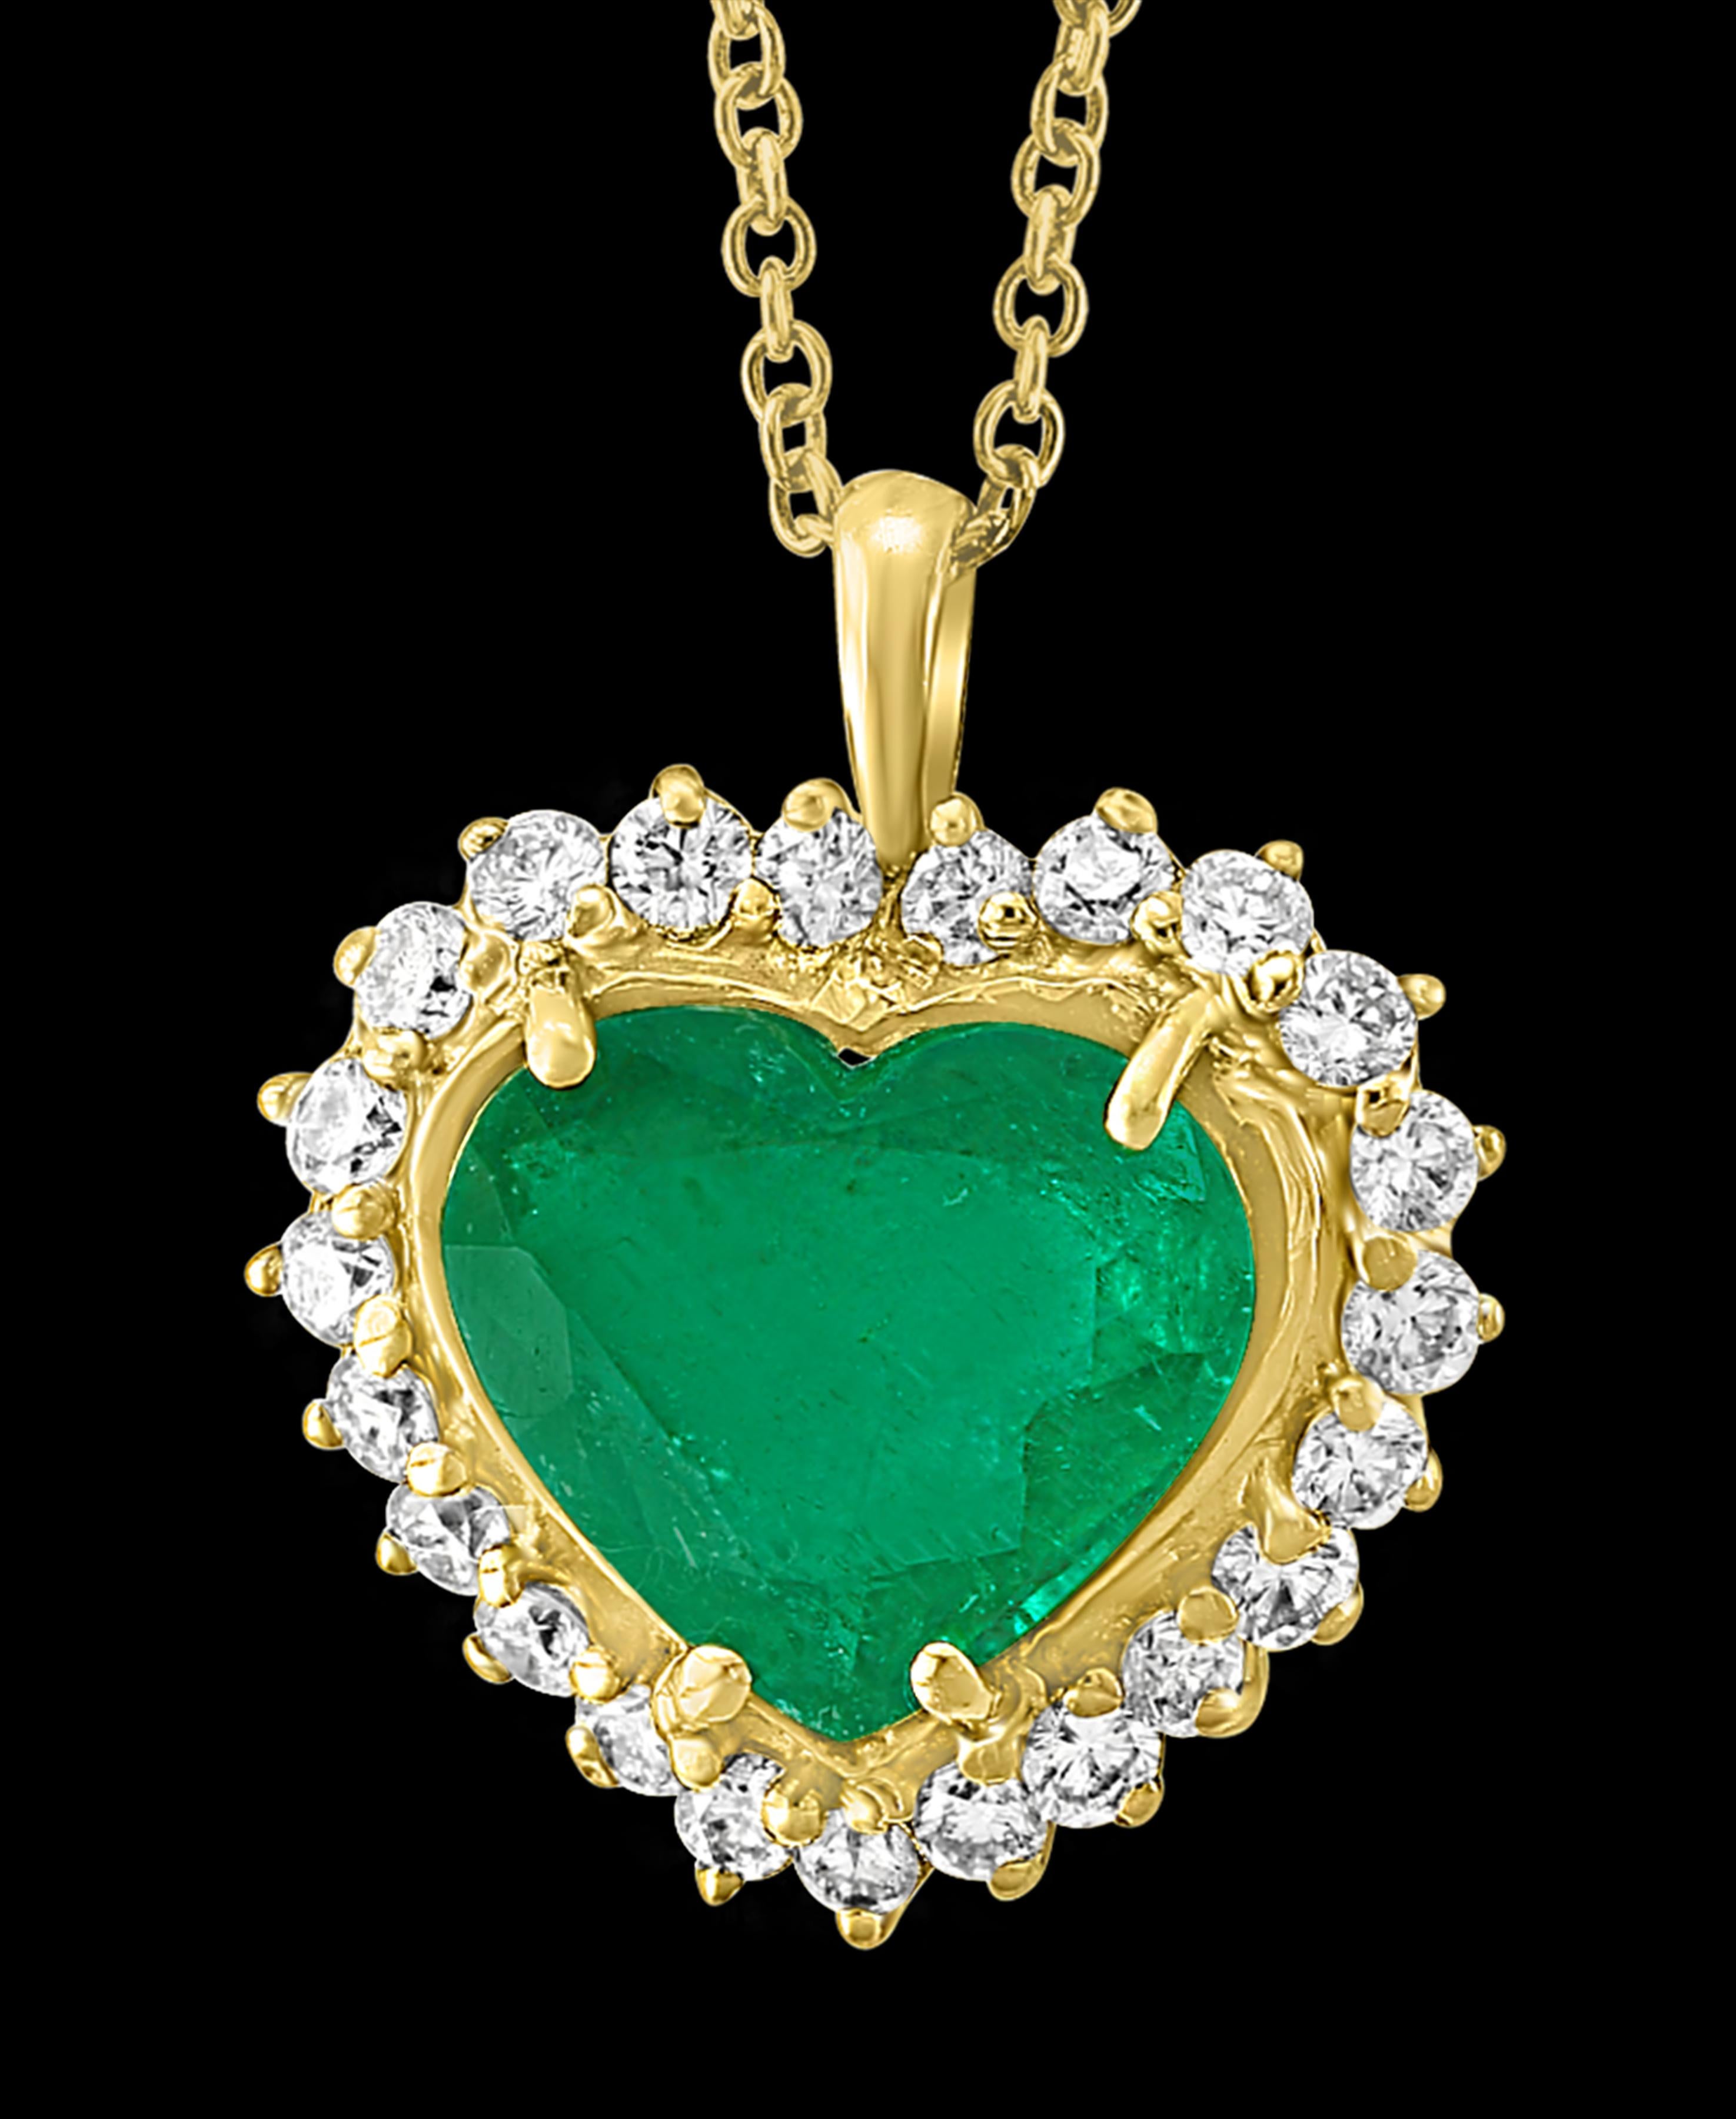  6+ Carat  Heart shape  Colombian Emerald and Diamond Pendant Necklace DBY chain
This spectacular Pendant Necklace  consisting of a single Heart shape emeralds approximately 6.38 Carat.  Colombian Emerald is very high quality. The perfect Heart